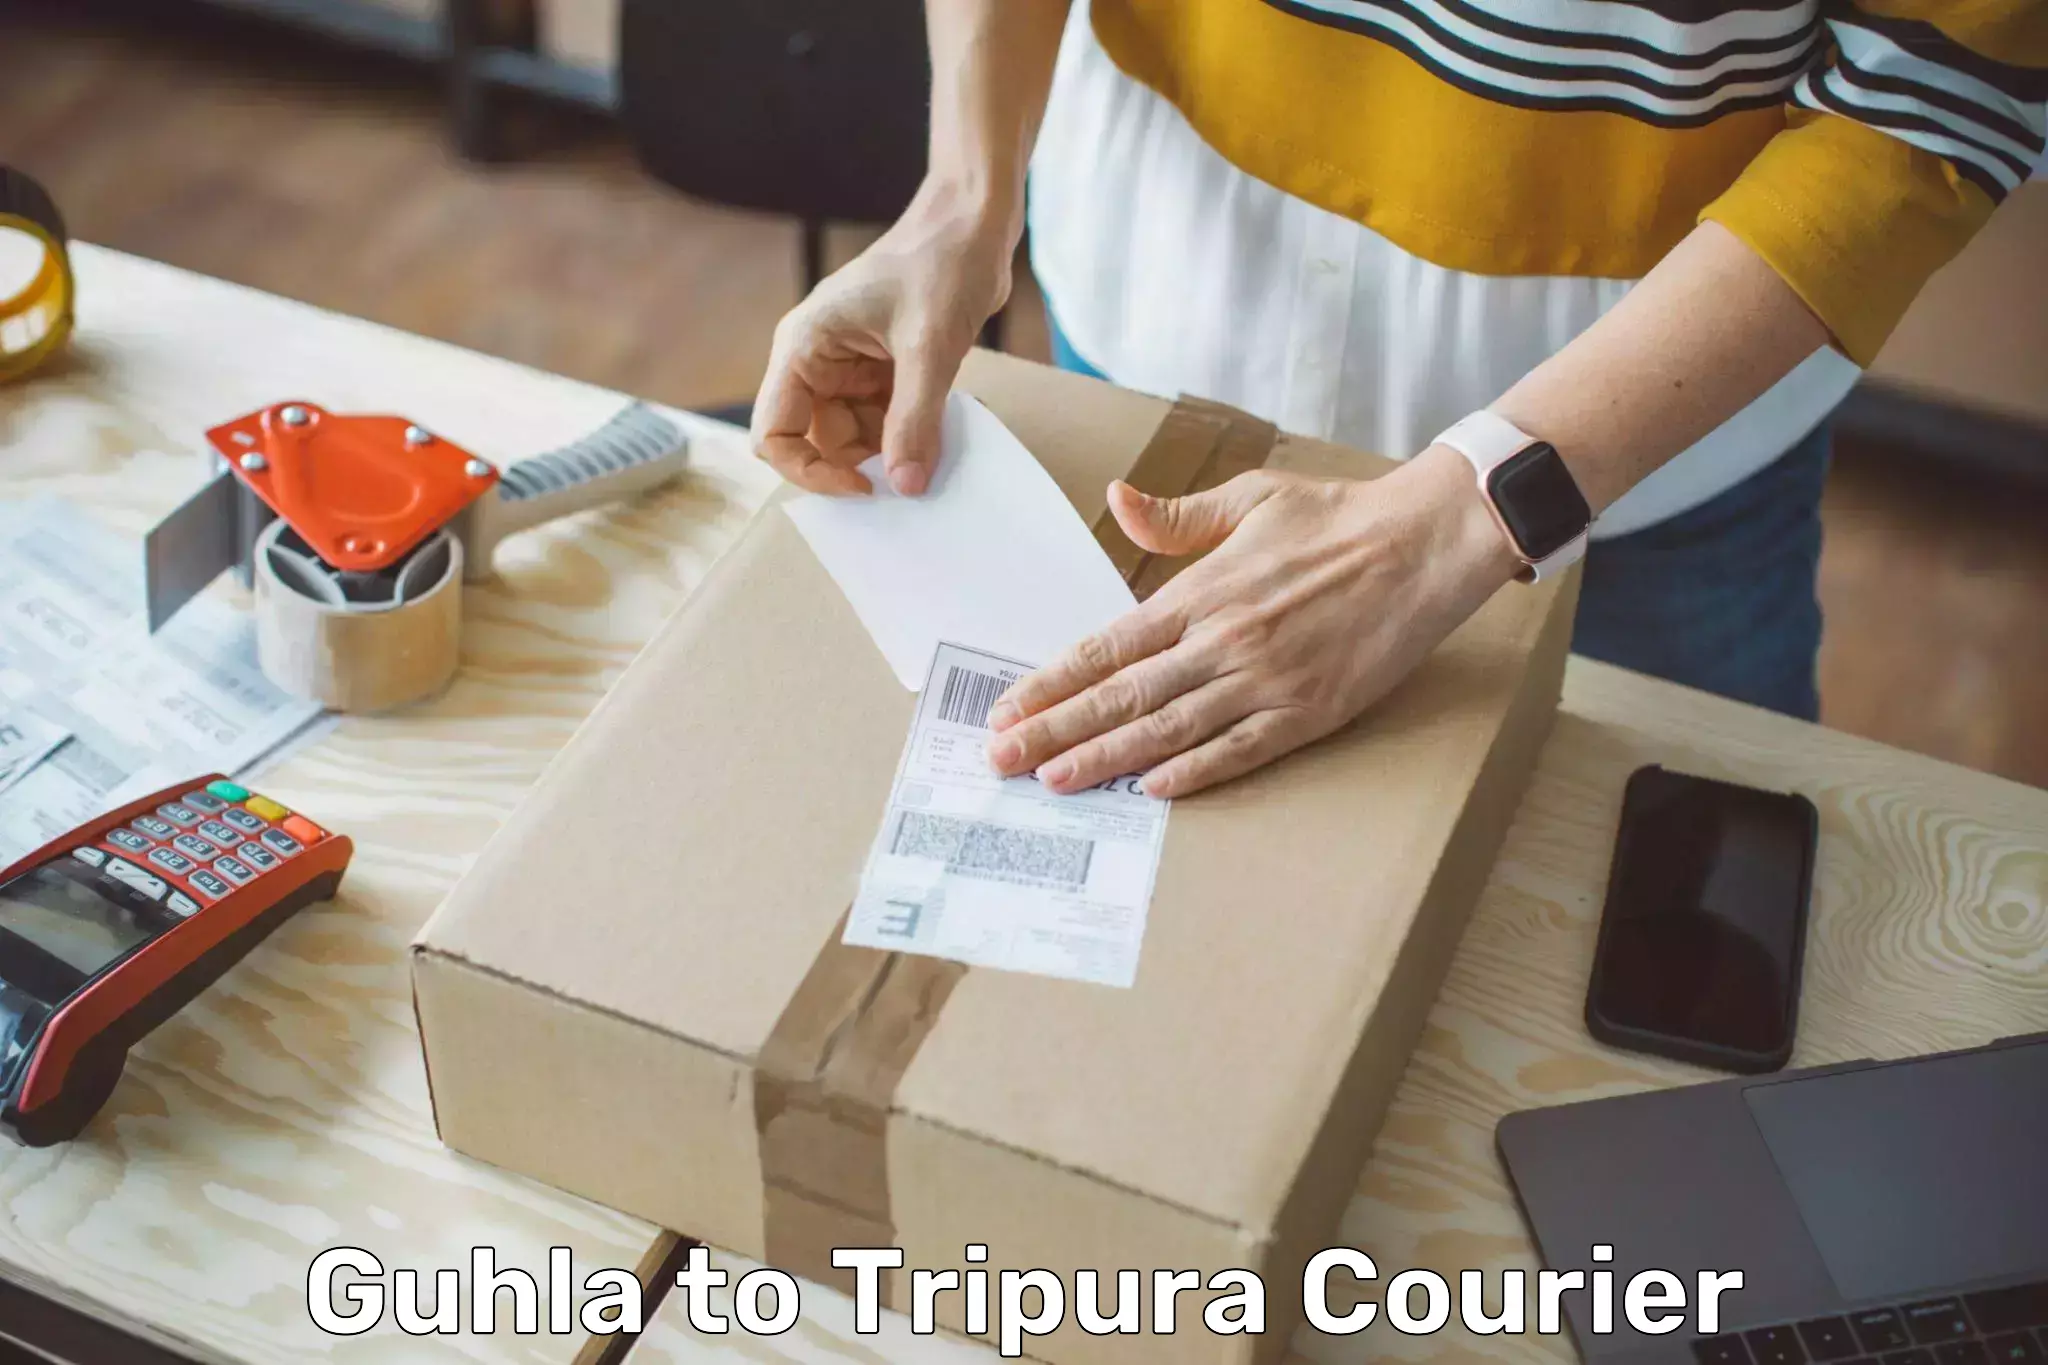 Specialized courier services Guhla to Udaipur Tripura